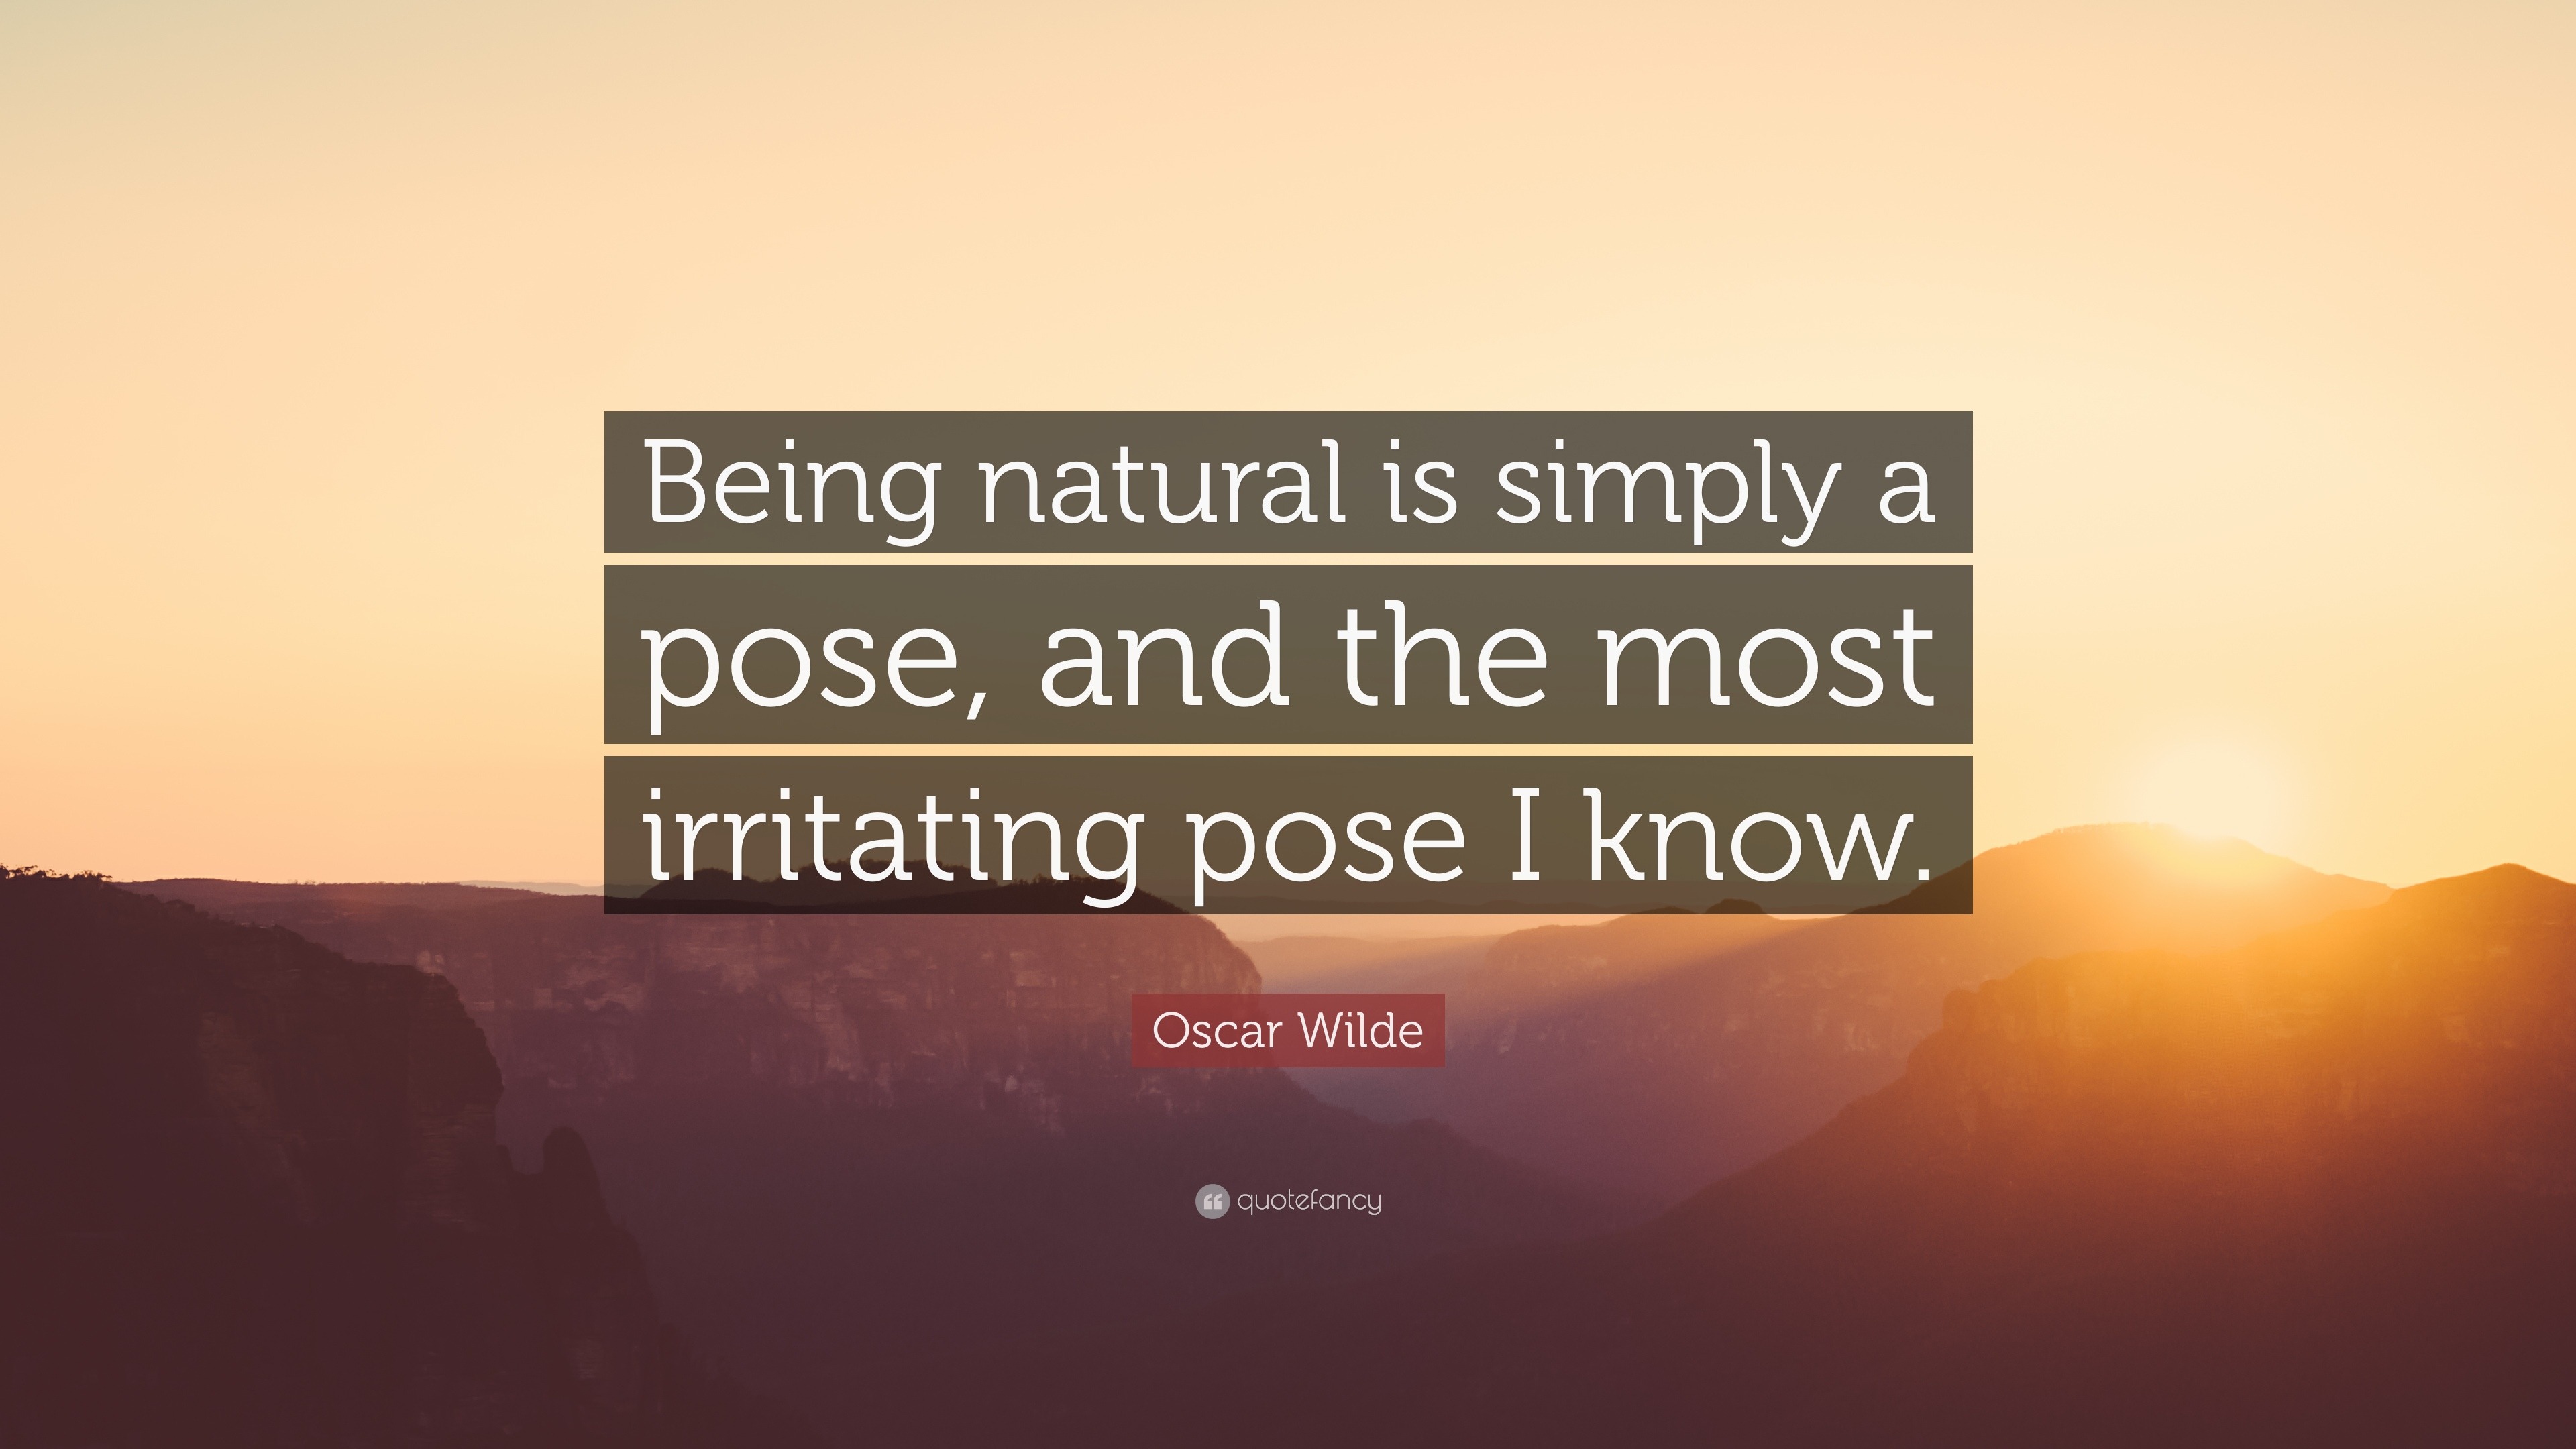 1842108 Oscar Wilde Quote Being natural is simply a pose and the most